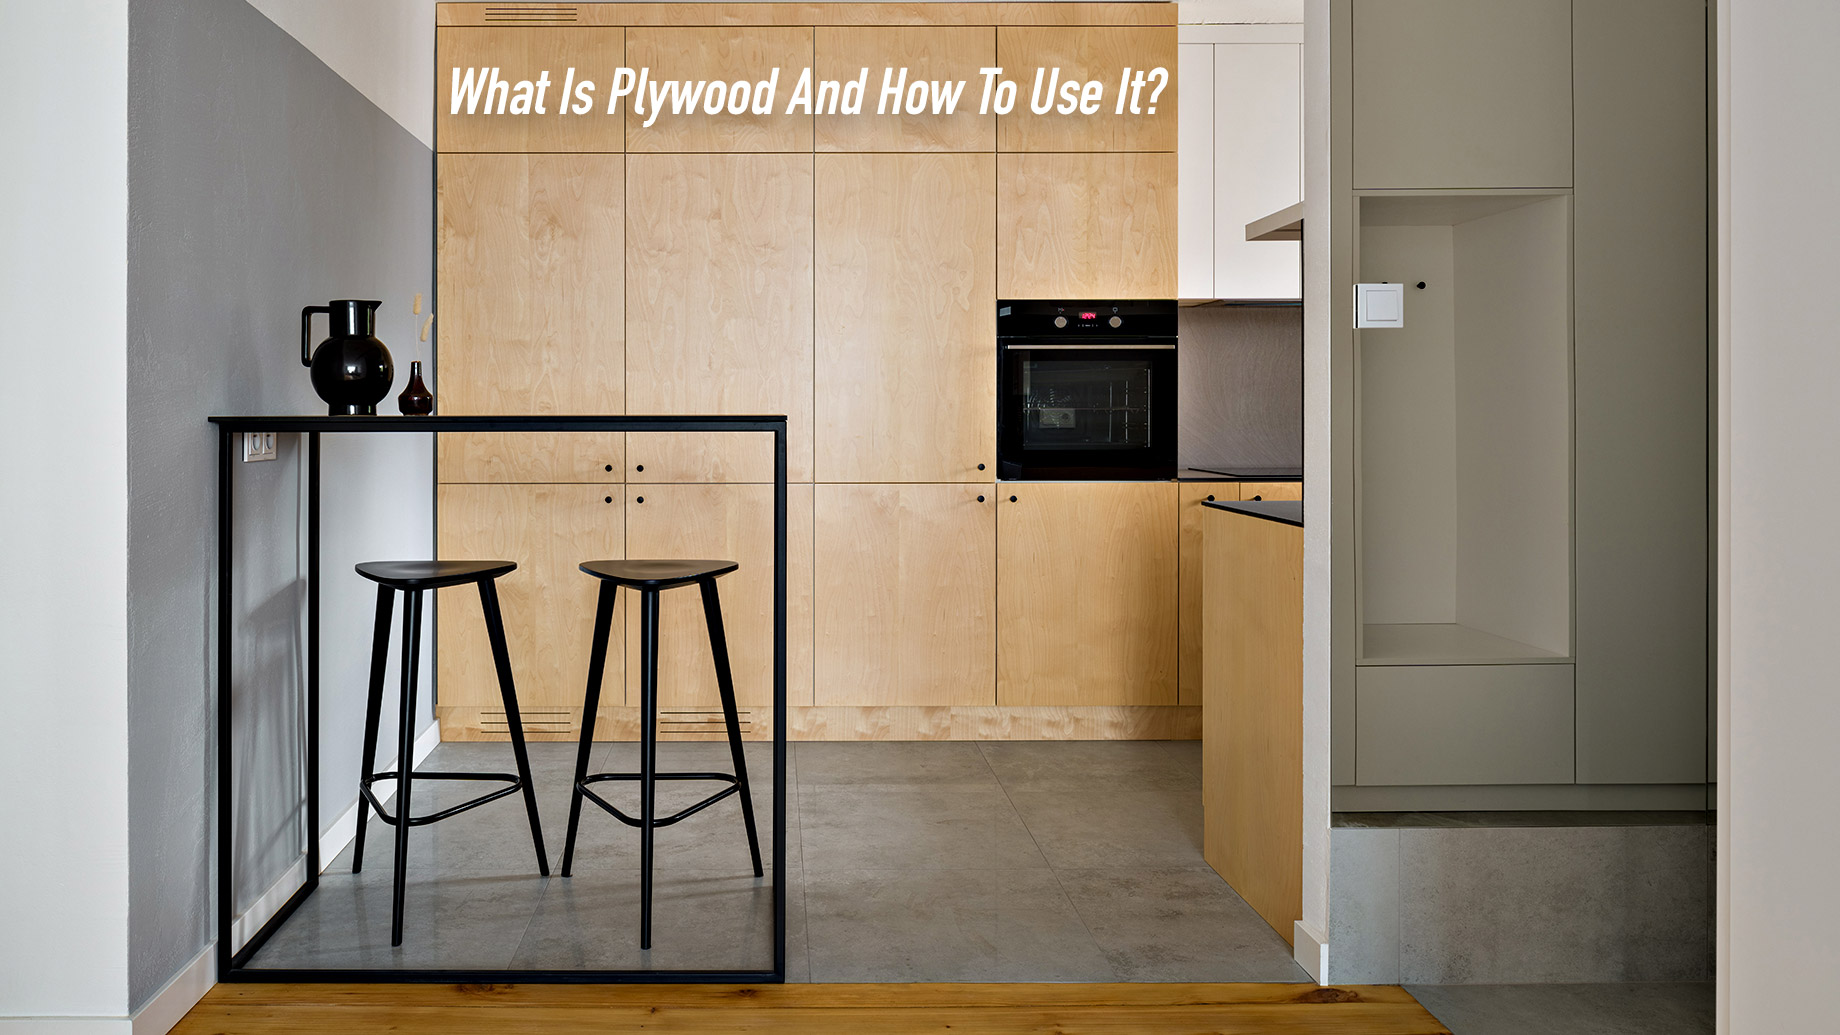 What Is Plywood And How To Use It?